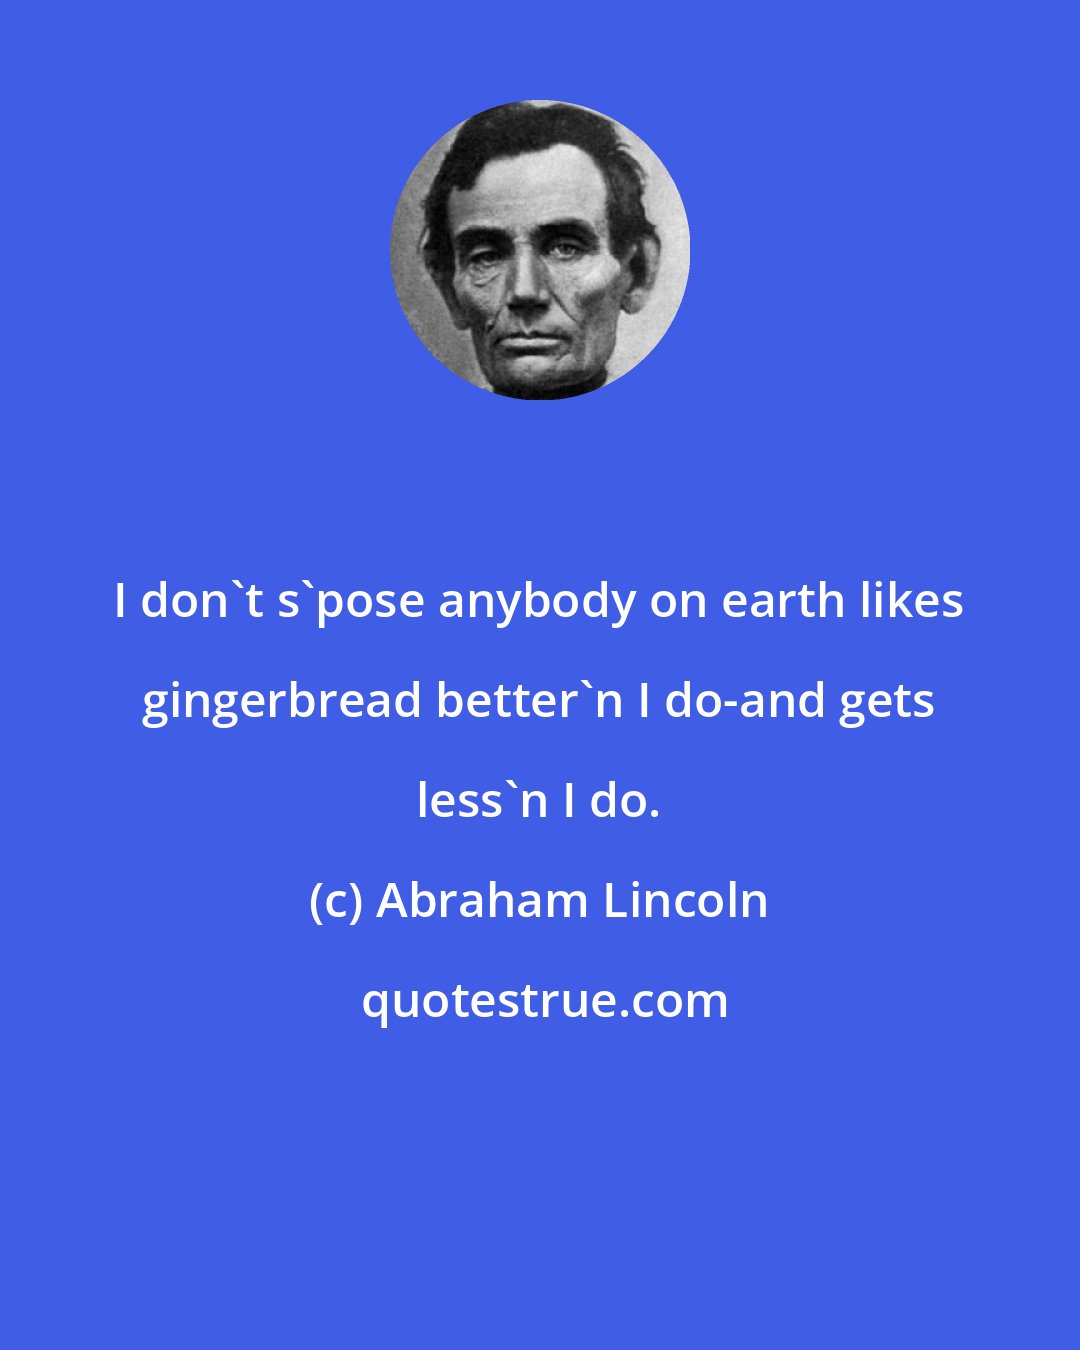 Abraham Lincoln: I don't s'pose anybody on earth likes gingerbread better'n I do-and gets less'n I do.